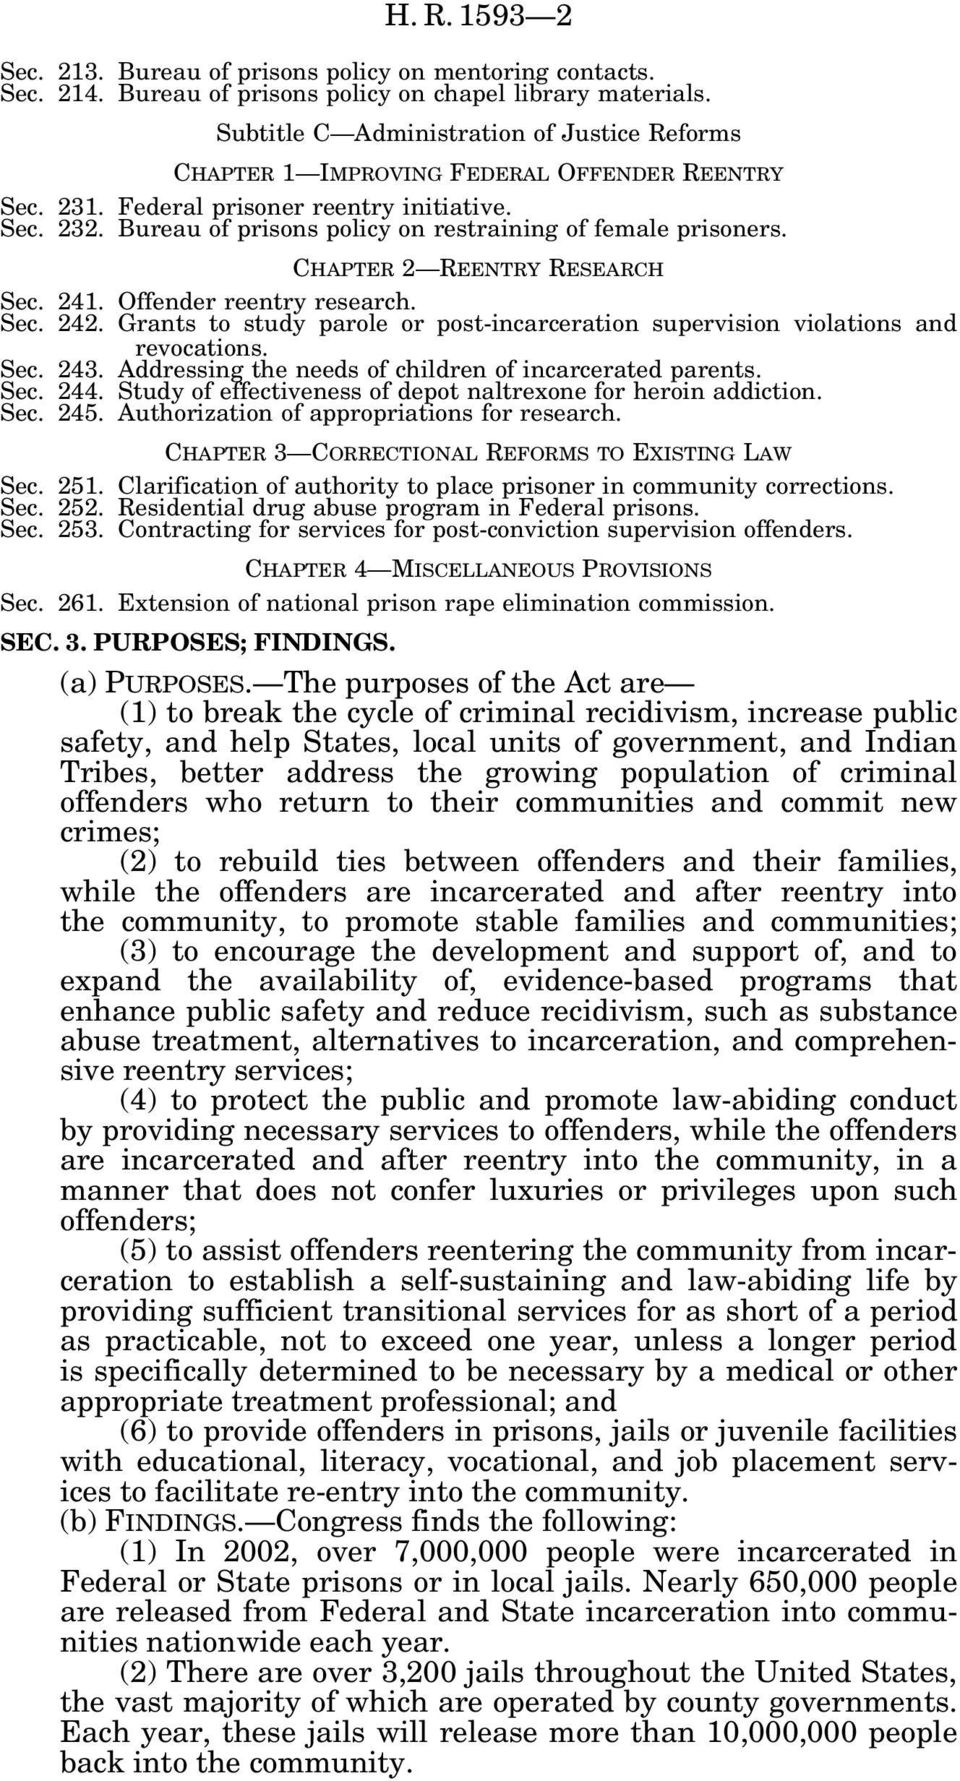 Bureau of prisons policy on restraining of female prisoners. CHAPTER 2 REENTRY RESEARCH Sec. 241. Offender reentry research. Sec. 242.